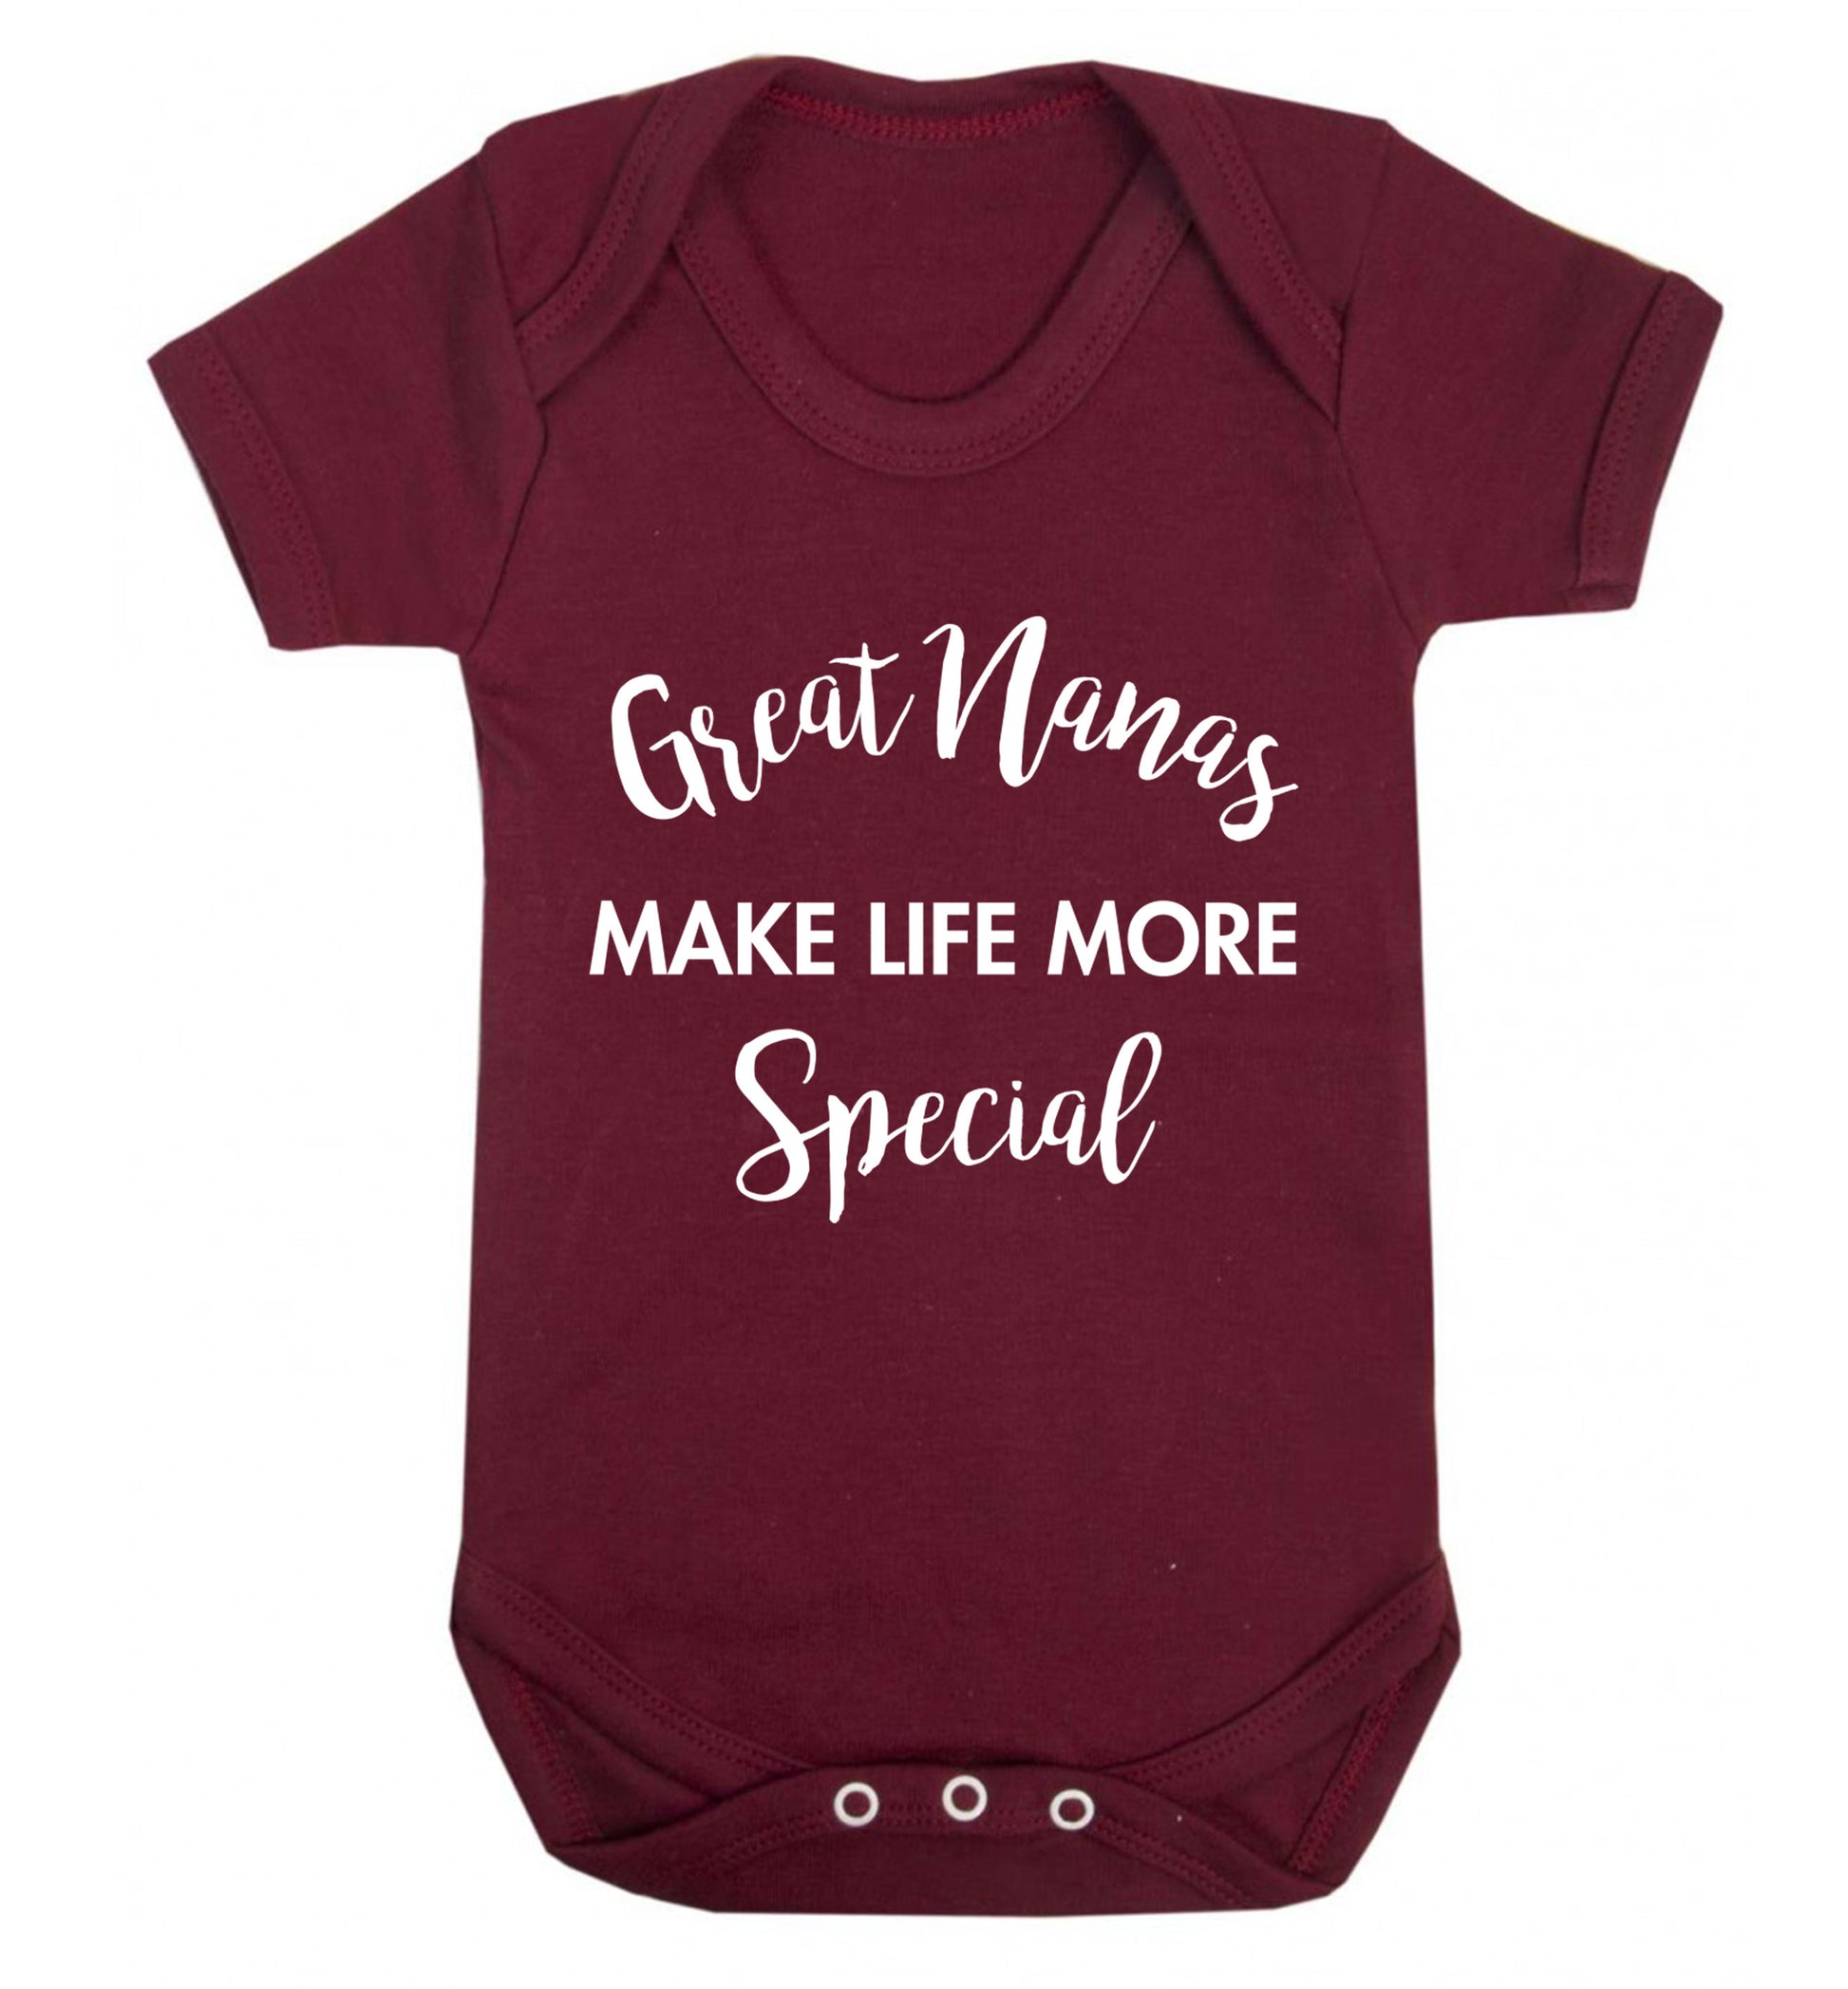 Great nanas make life more special Baby Vest maroon 18-24 months